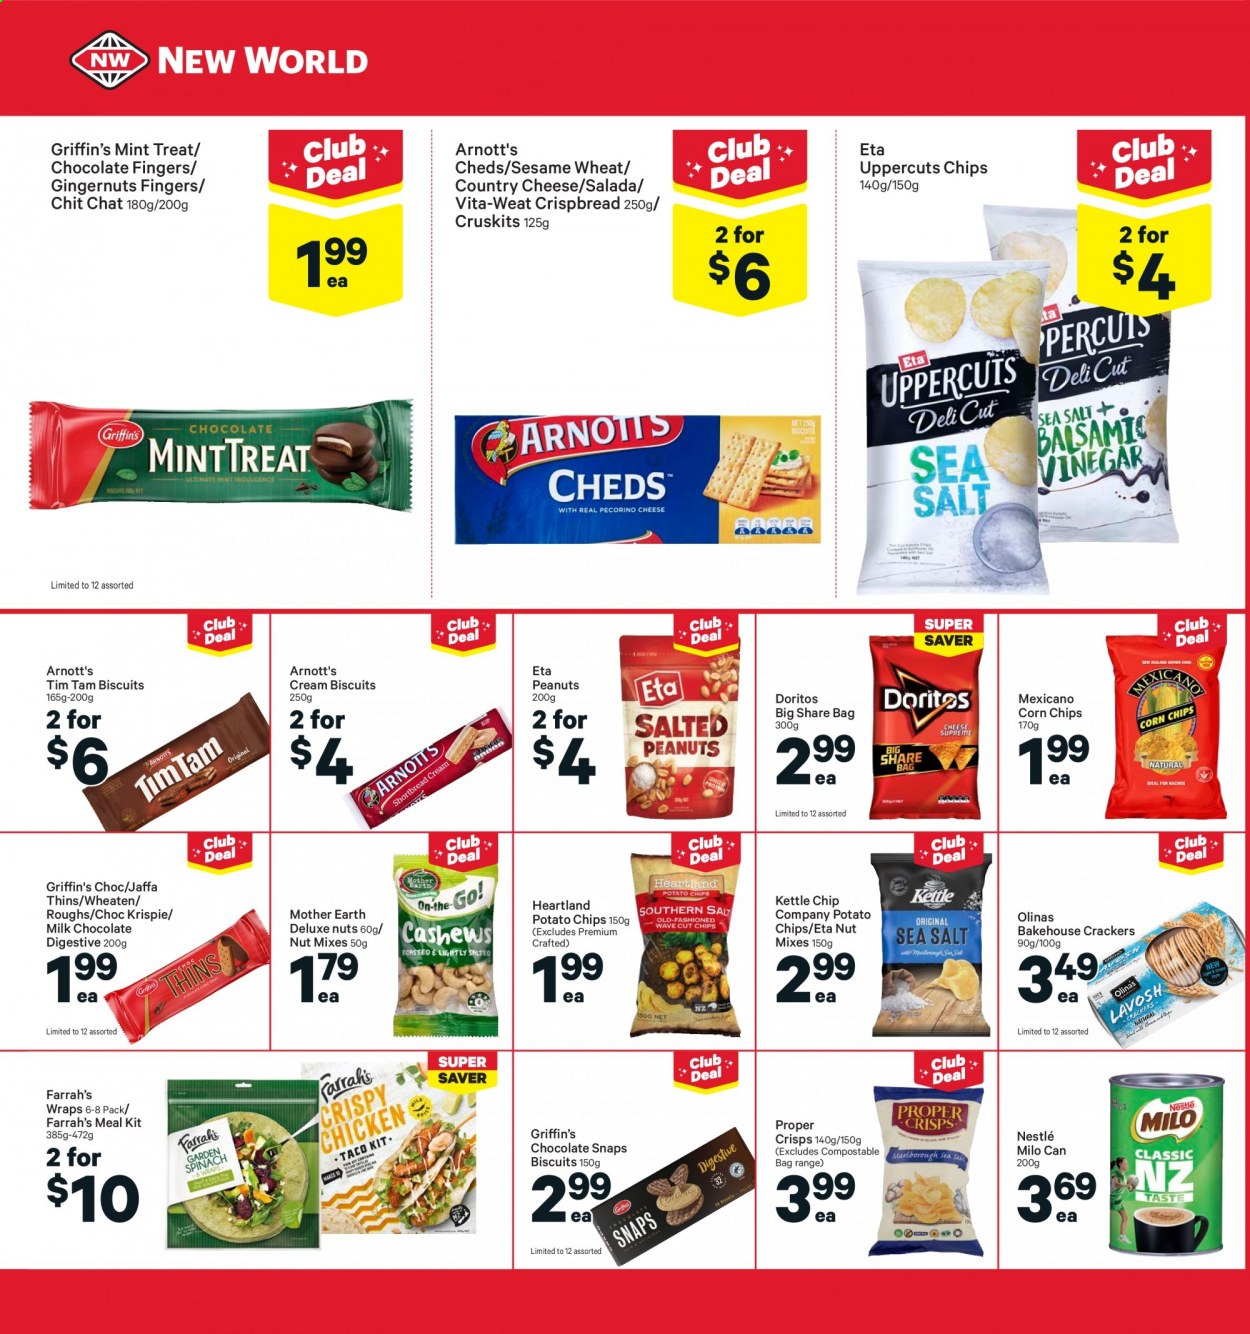 thumbnail - New World mailer - 19.07.2021 - 25.07.2021 - Sales products - wraps, crispbread, cheese, Milo, milk chocolate, Nestlé, chocolate, crackers, Tim Tam, biscuit, Griffin's, Mother Earth, Digestive, Doritos, potato chips, chips, Thins, corn chips, Heartland, Mexicano, peanuts. Page 20.